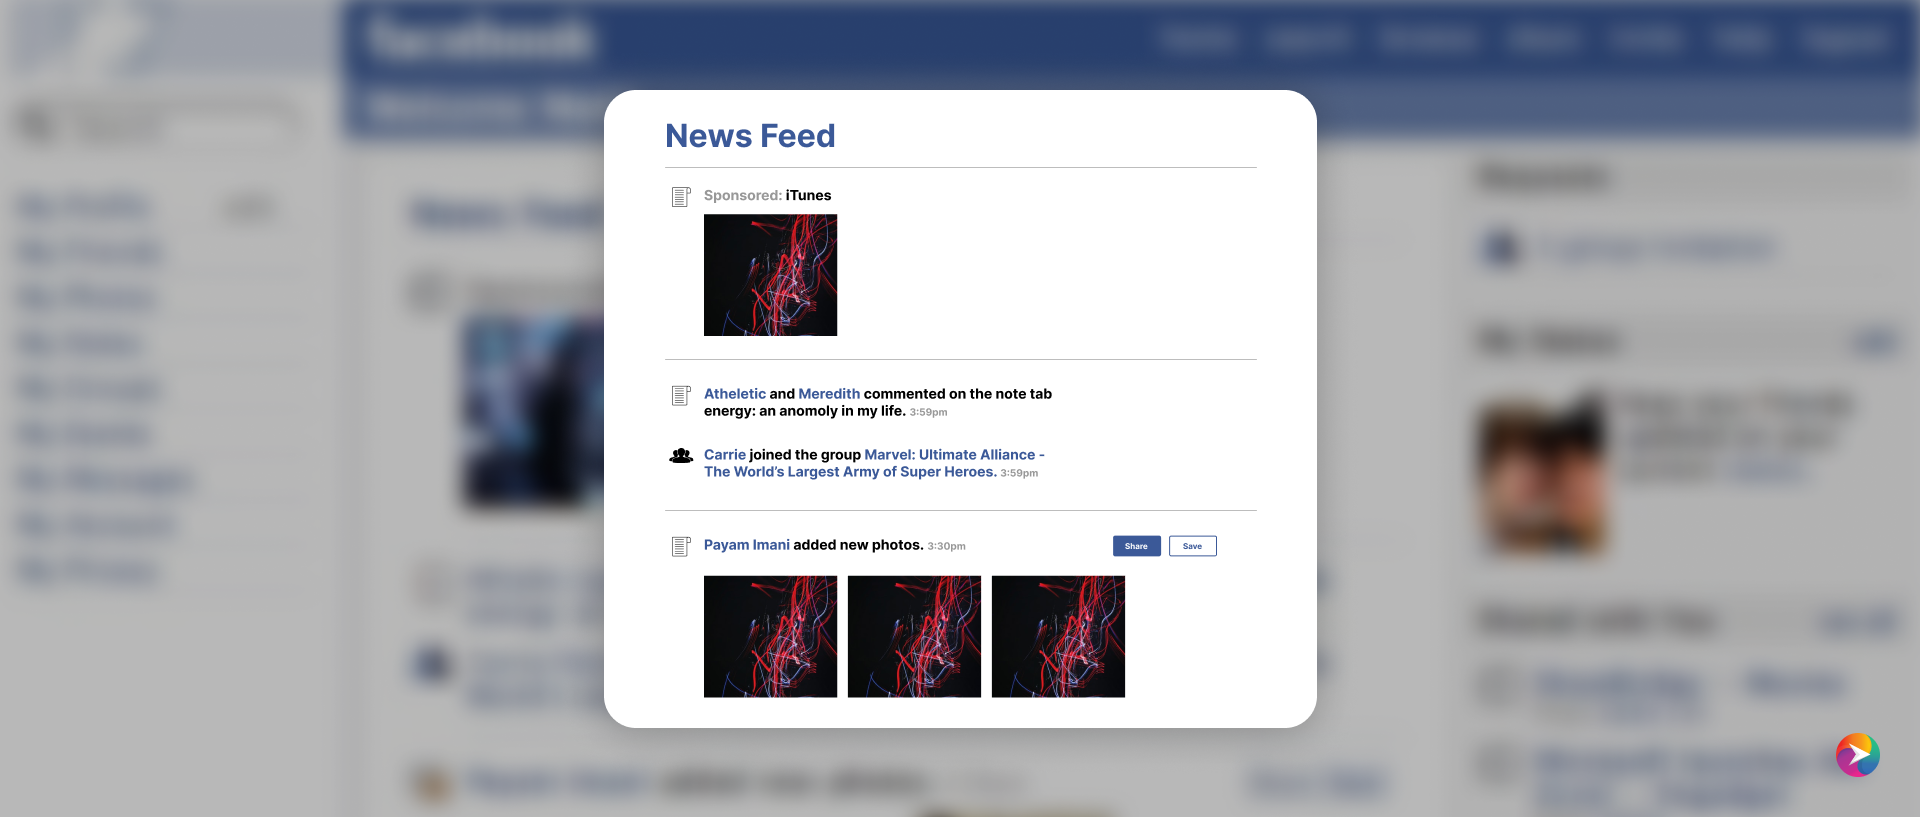 INTRODUCING THE NEWS FEED